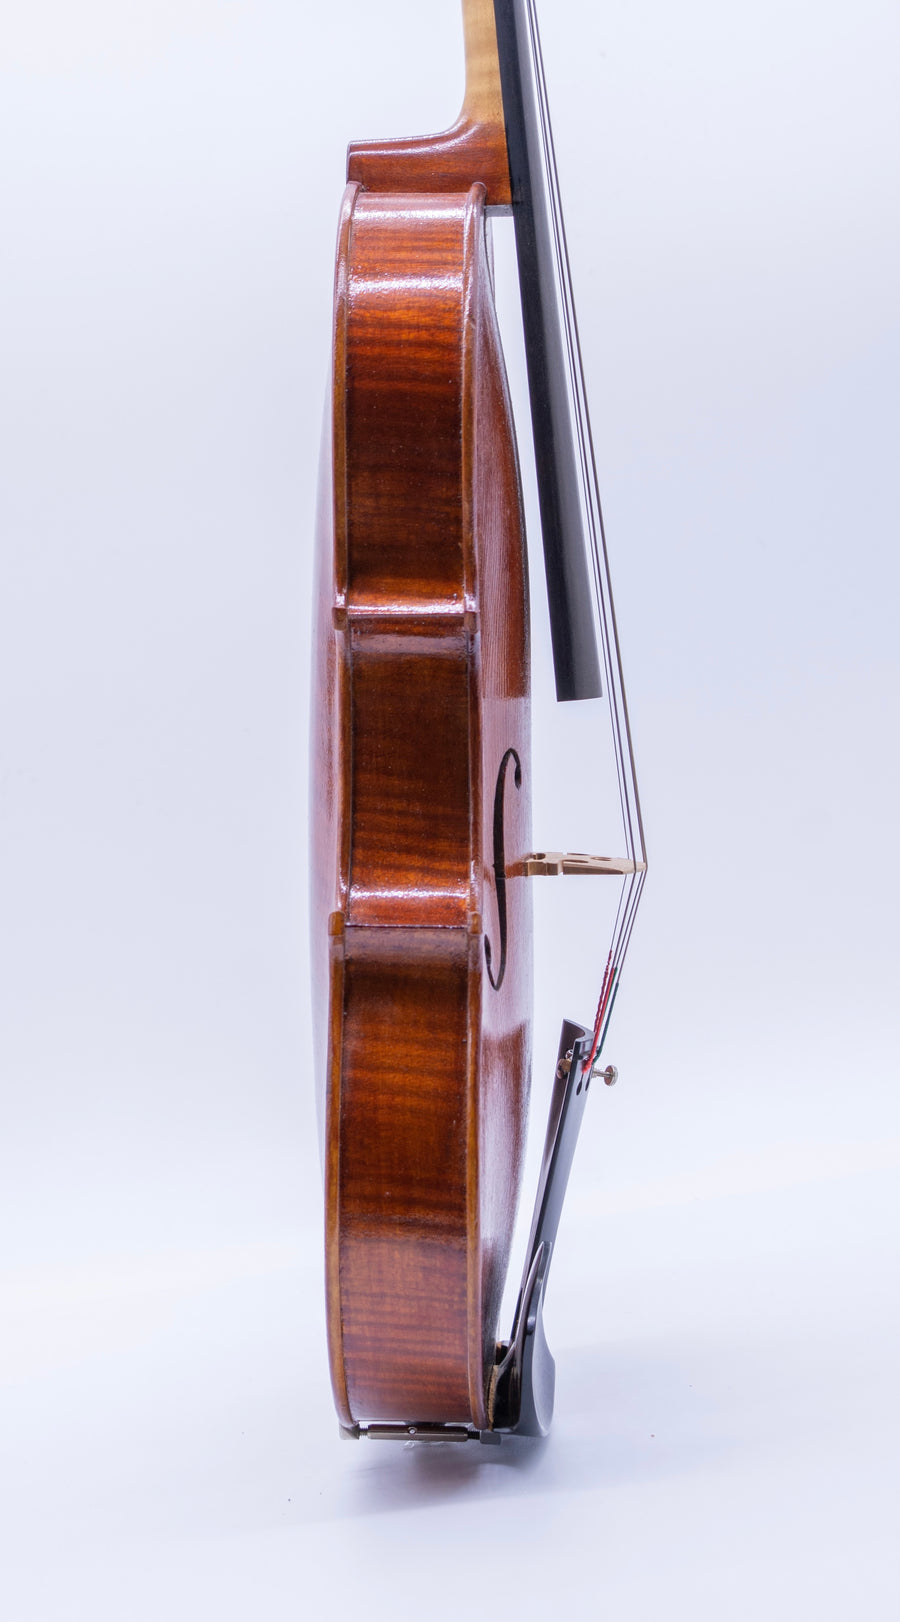 A Contemporary American Viola By Todd Goldenberg, 2020. 15 3/4.”